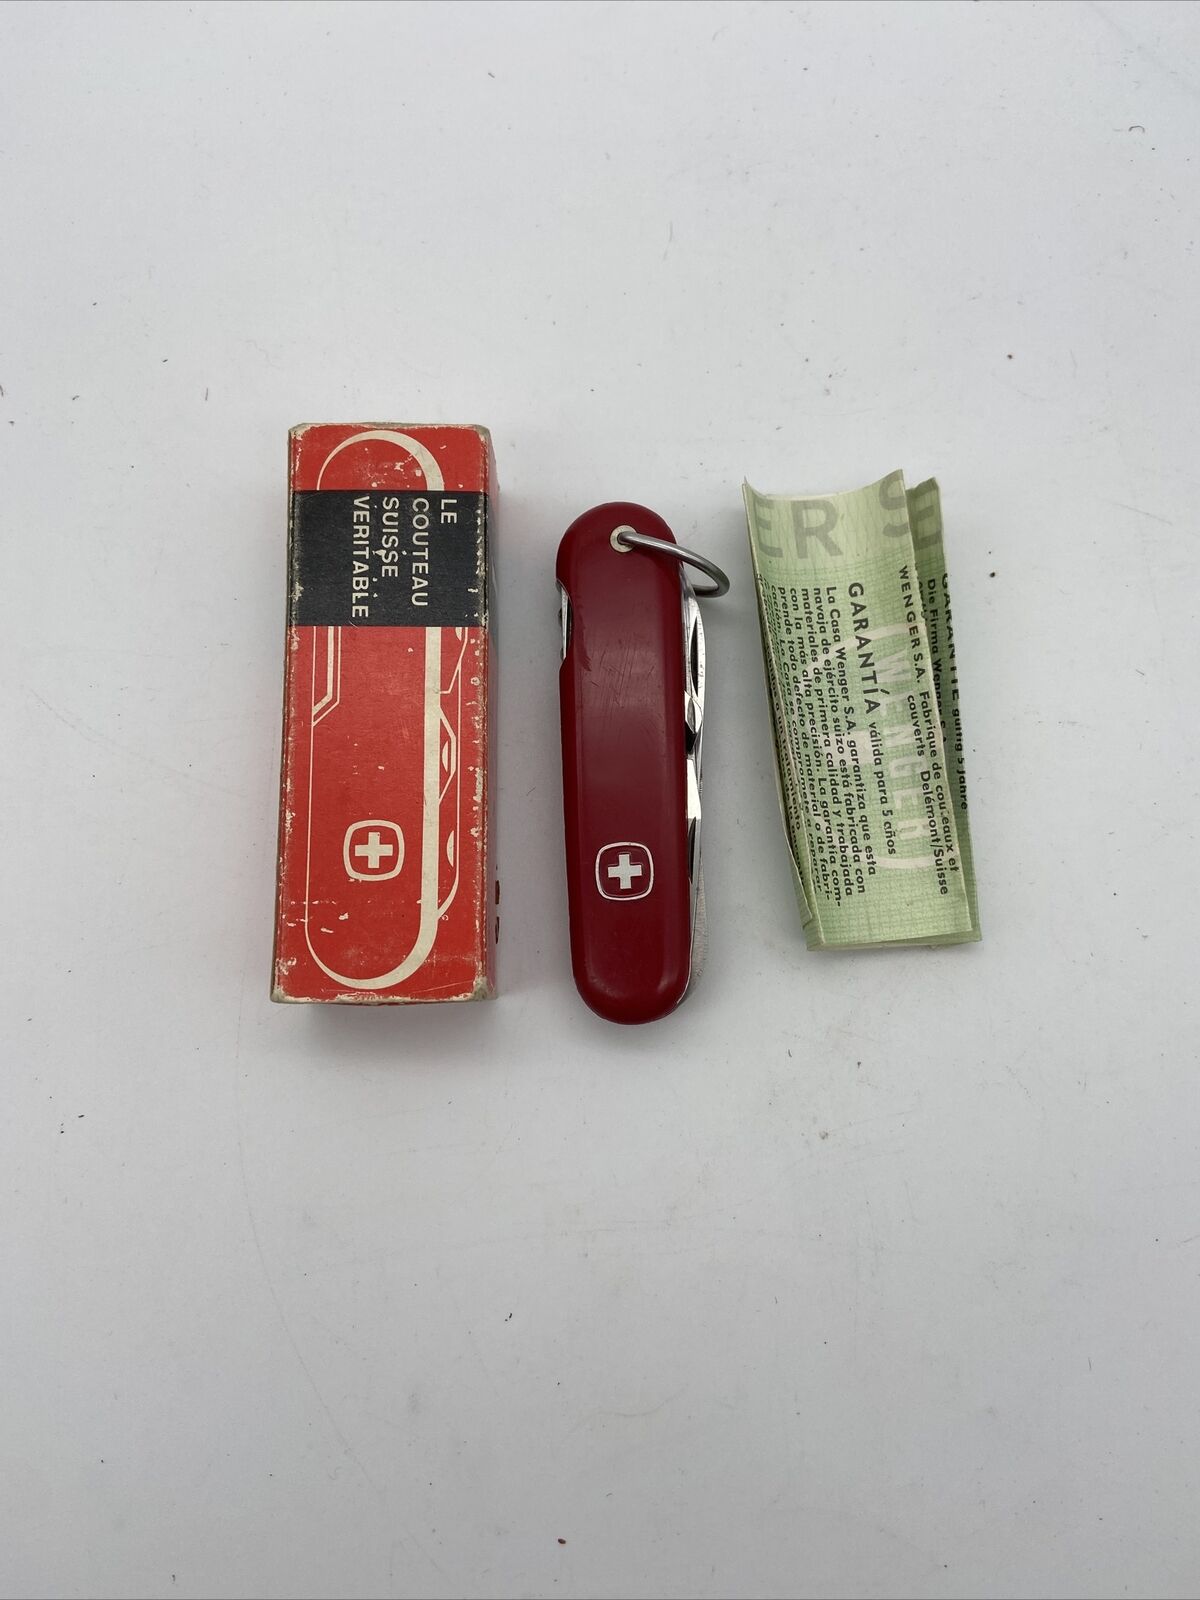 Wenger Genuine Swiss Army Knife In Box - New NOS Vintage